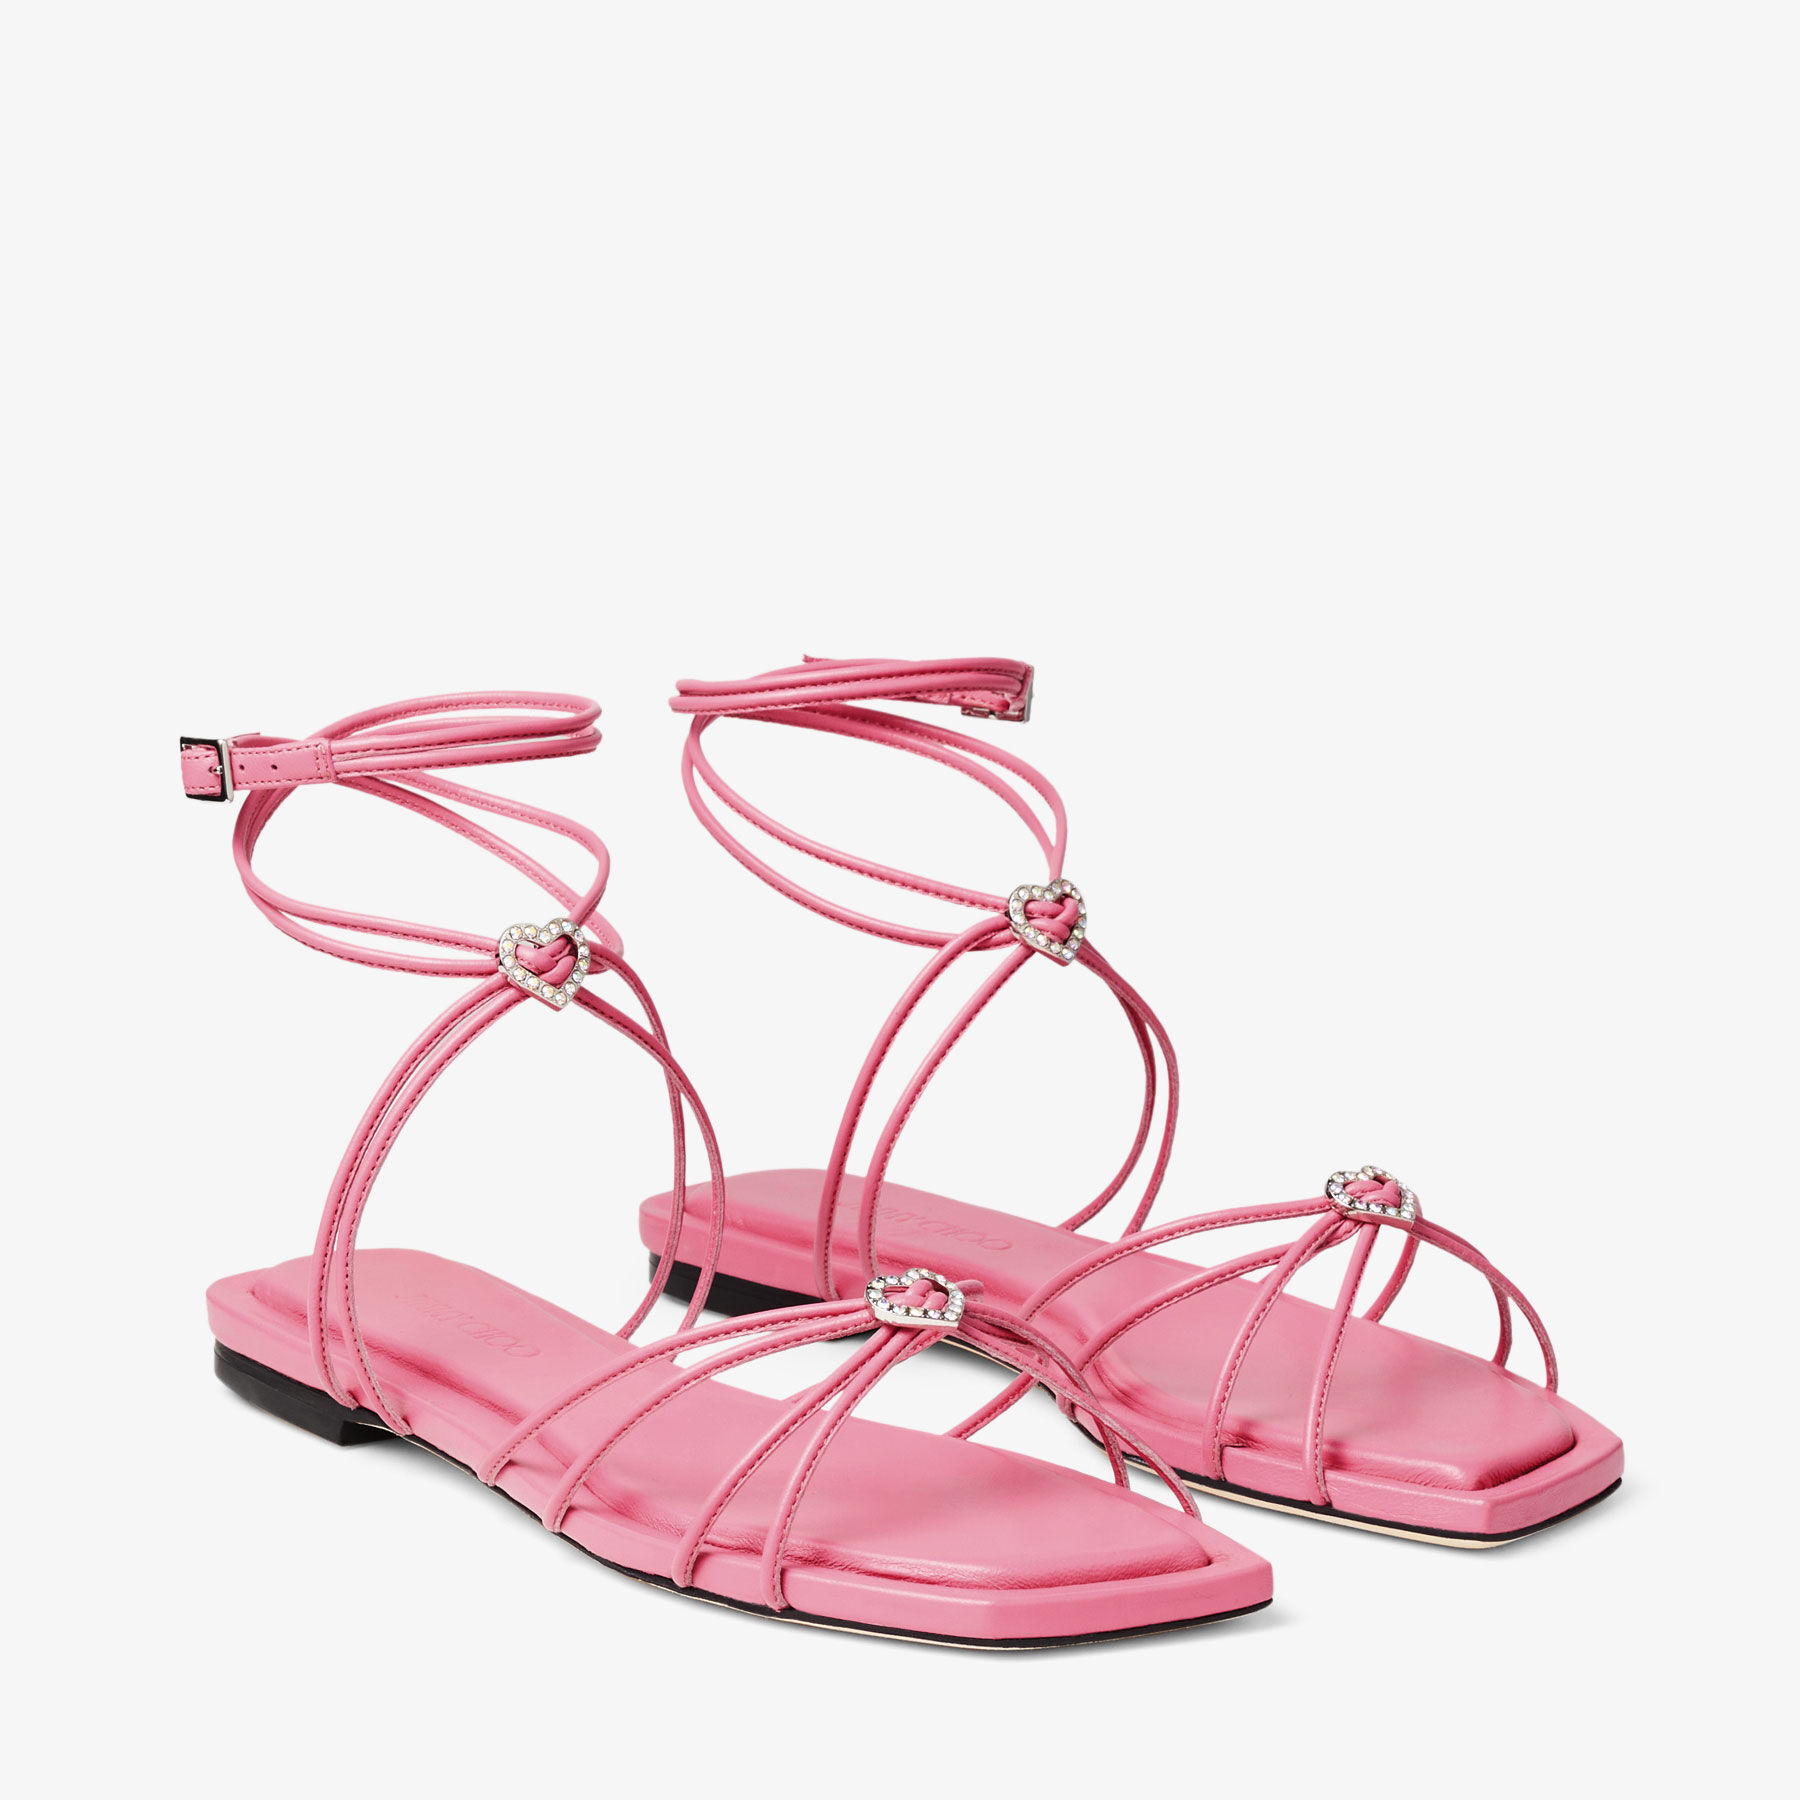 INDIYA FLAT | Candy Pink Nappa Leather Flat Sandals with Crystal Hearts ...